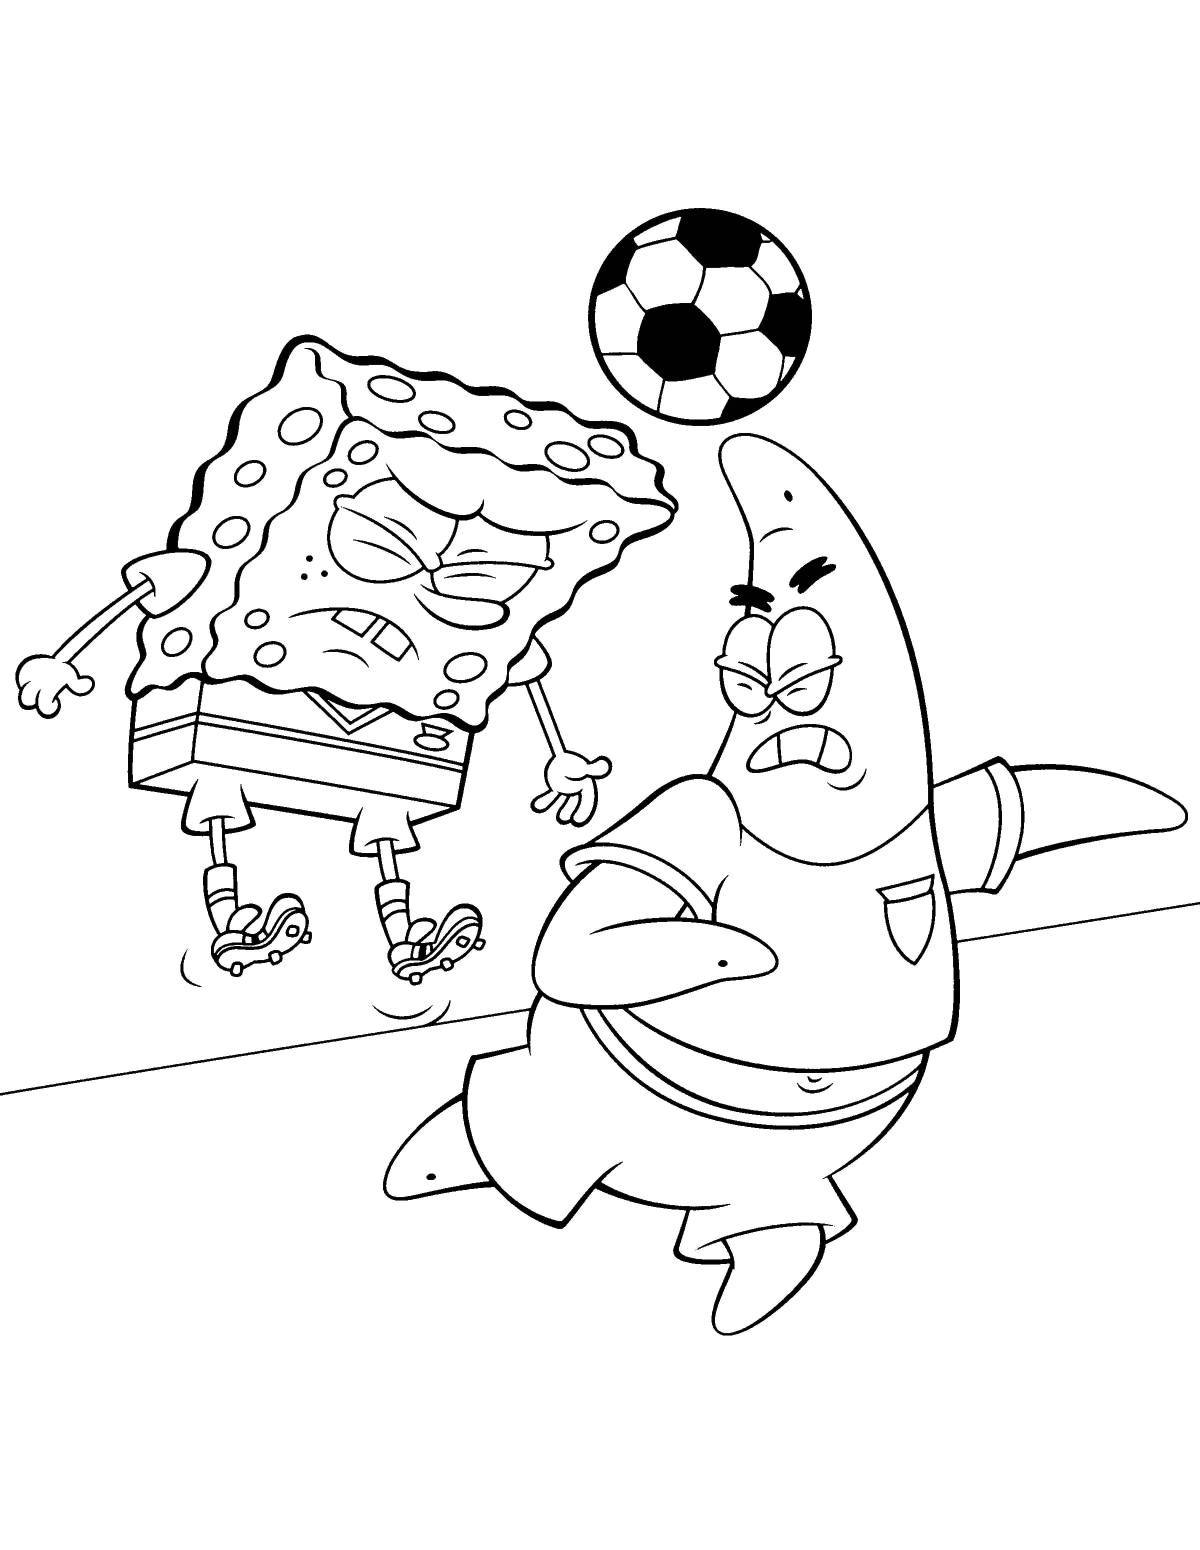 Squidward Dramatic Coloring Page